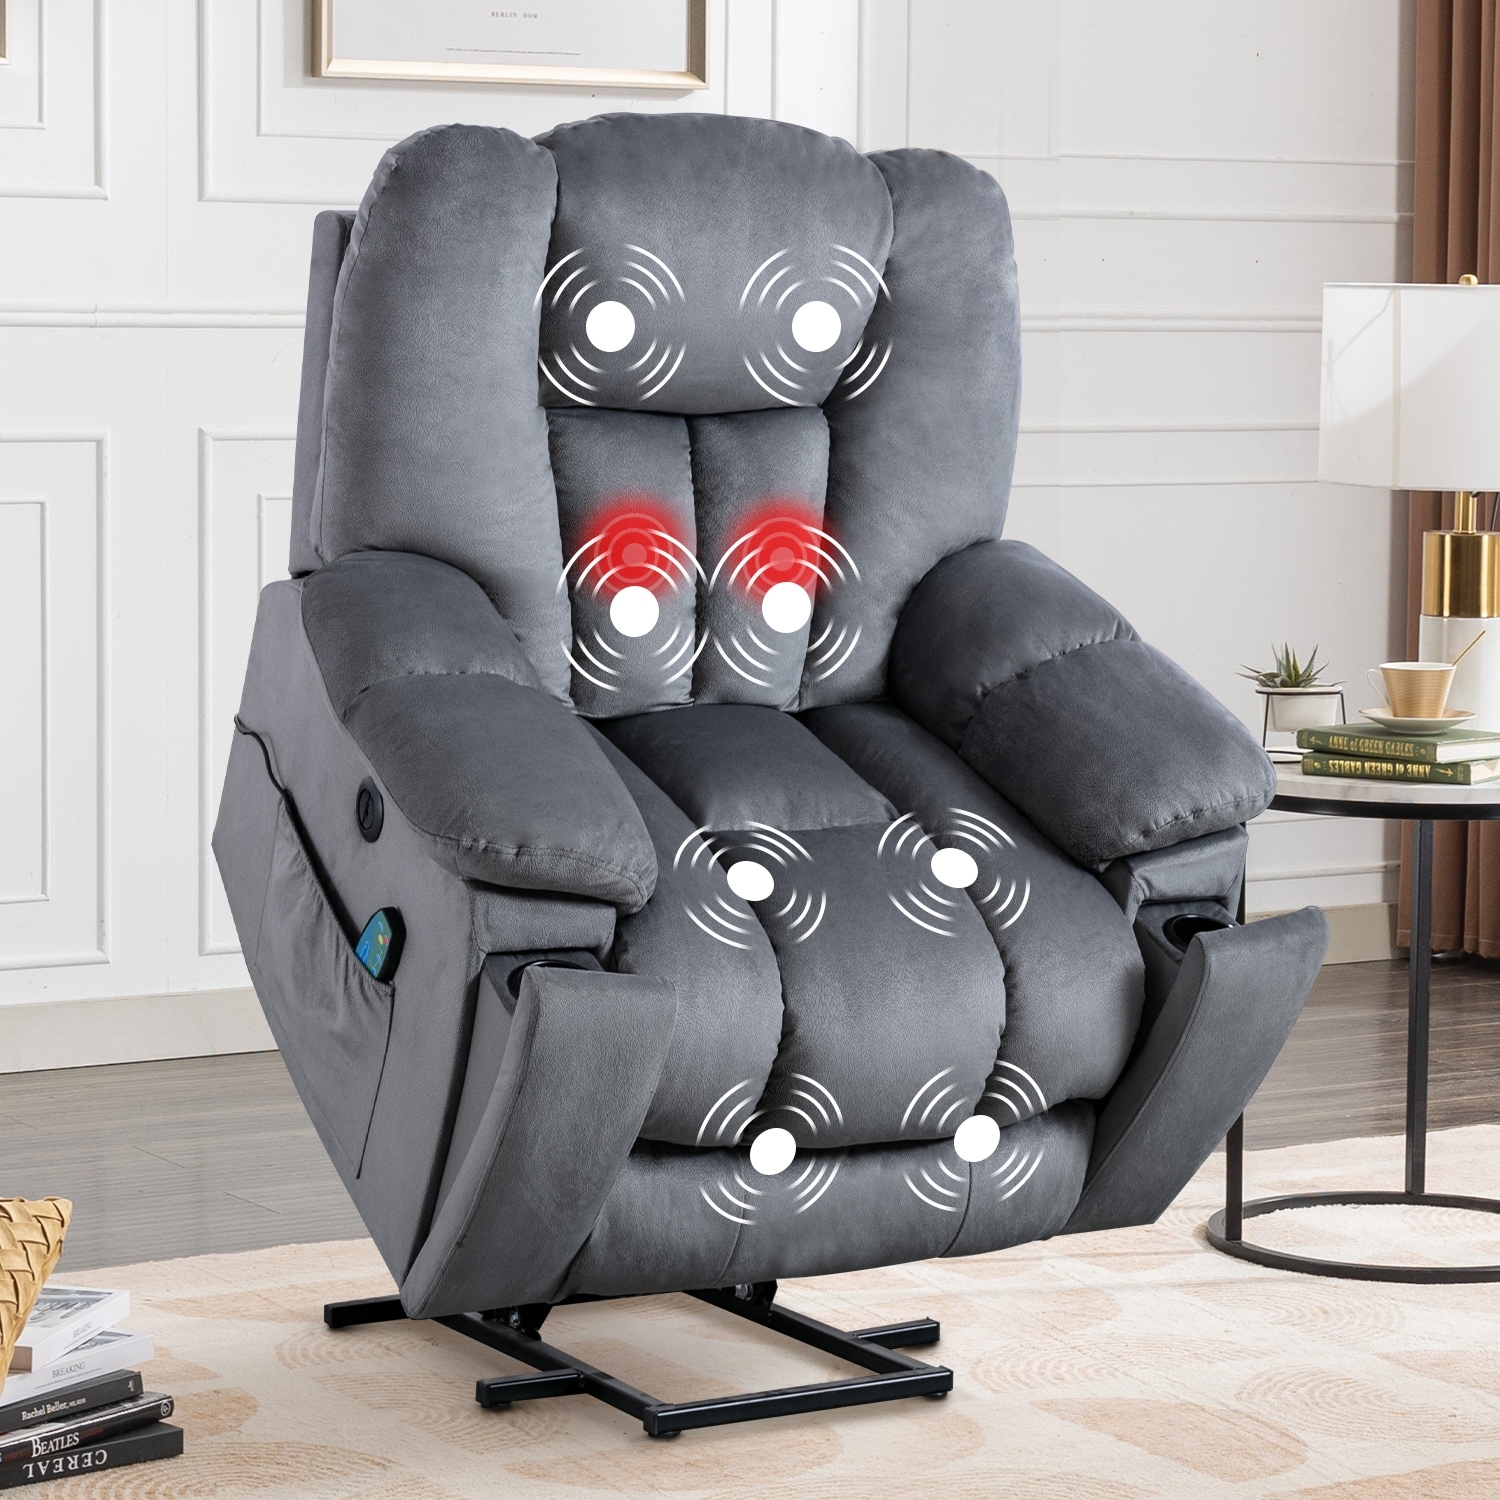 https://ak1.ostkcdn.com/images/products/is/images/direct/39191eefd6752e4094ededde52122701fdc065df/Oversized-Power-Assist-Lift-Recliner-Chair-With-Massage-and-Heating-with-2-Concealed-Cup-Holders-for-Elderly.jpg